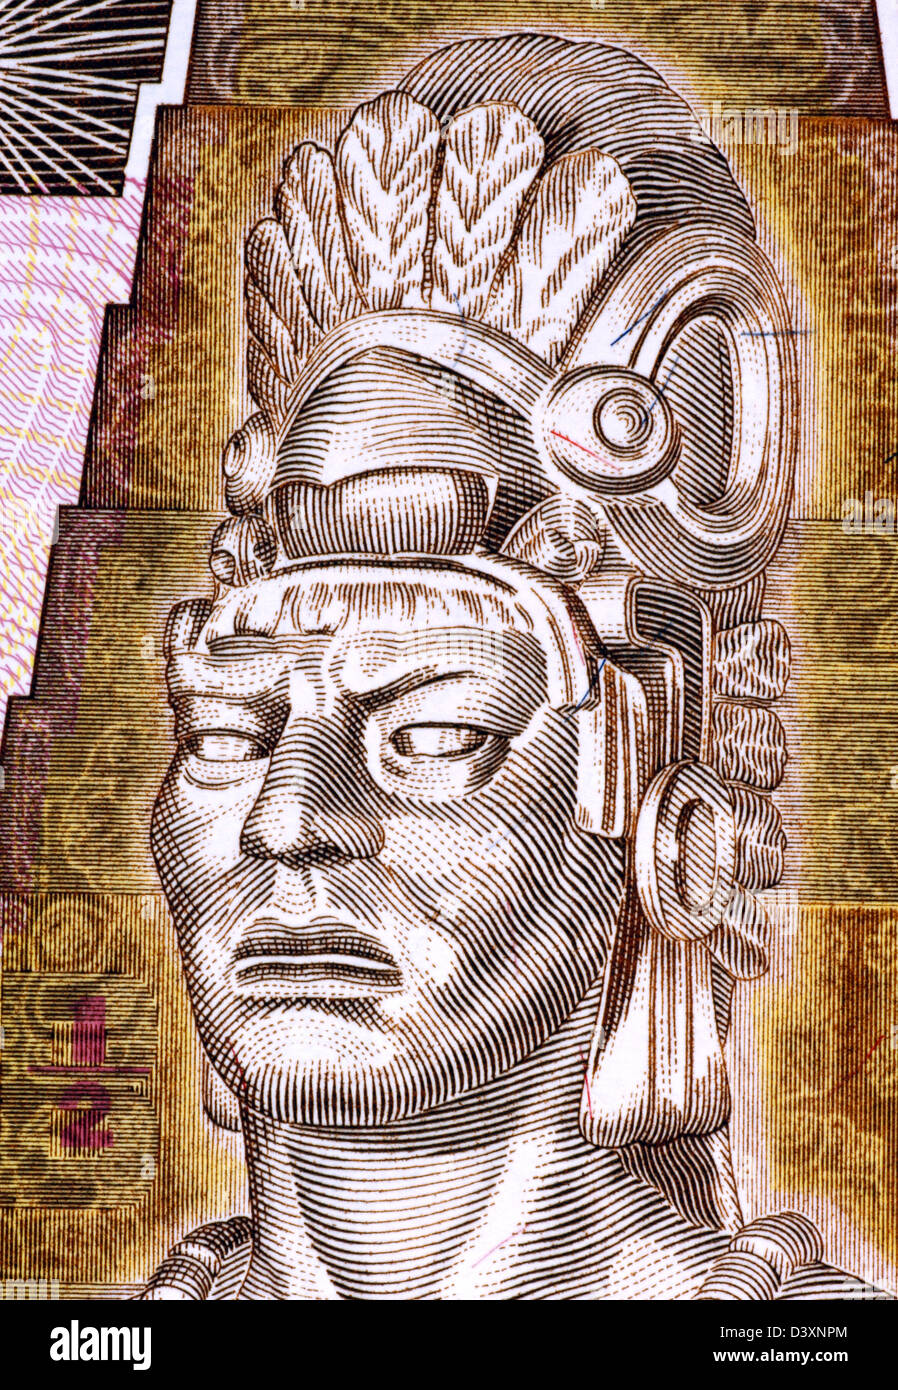 Tecun Uman (1500-1524) on Half Quetzal 1998 Banknote from Guatemala. Last ruler and king of the K'iche' Maya people. Stock Photo